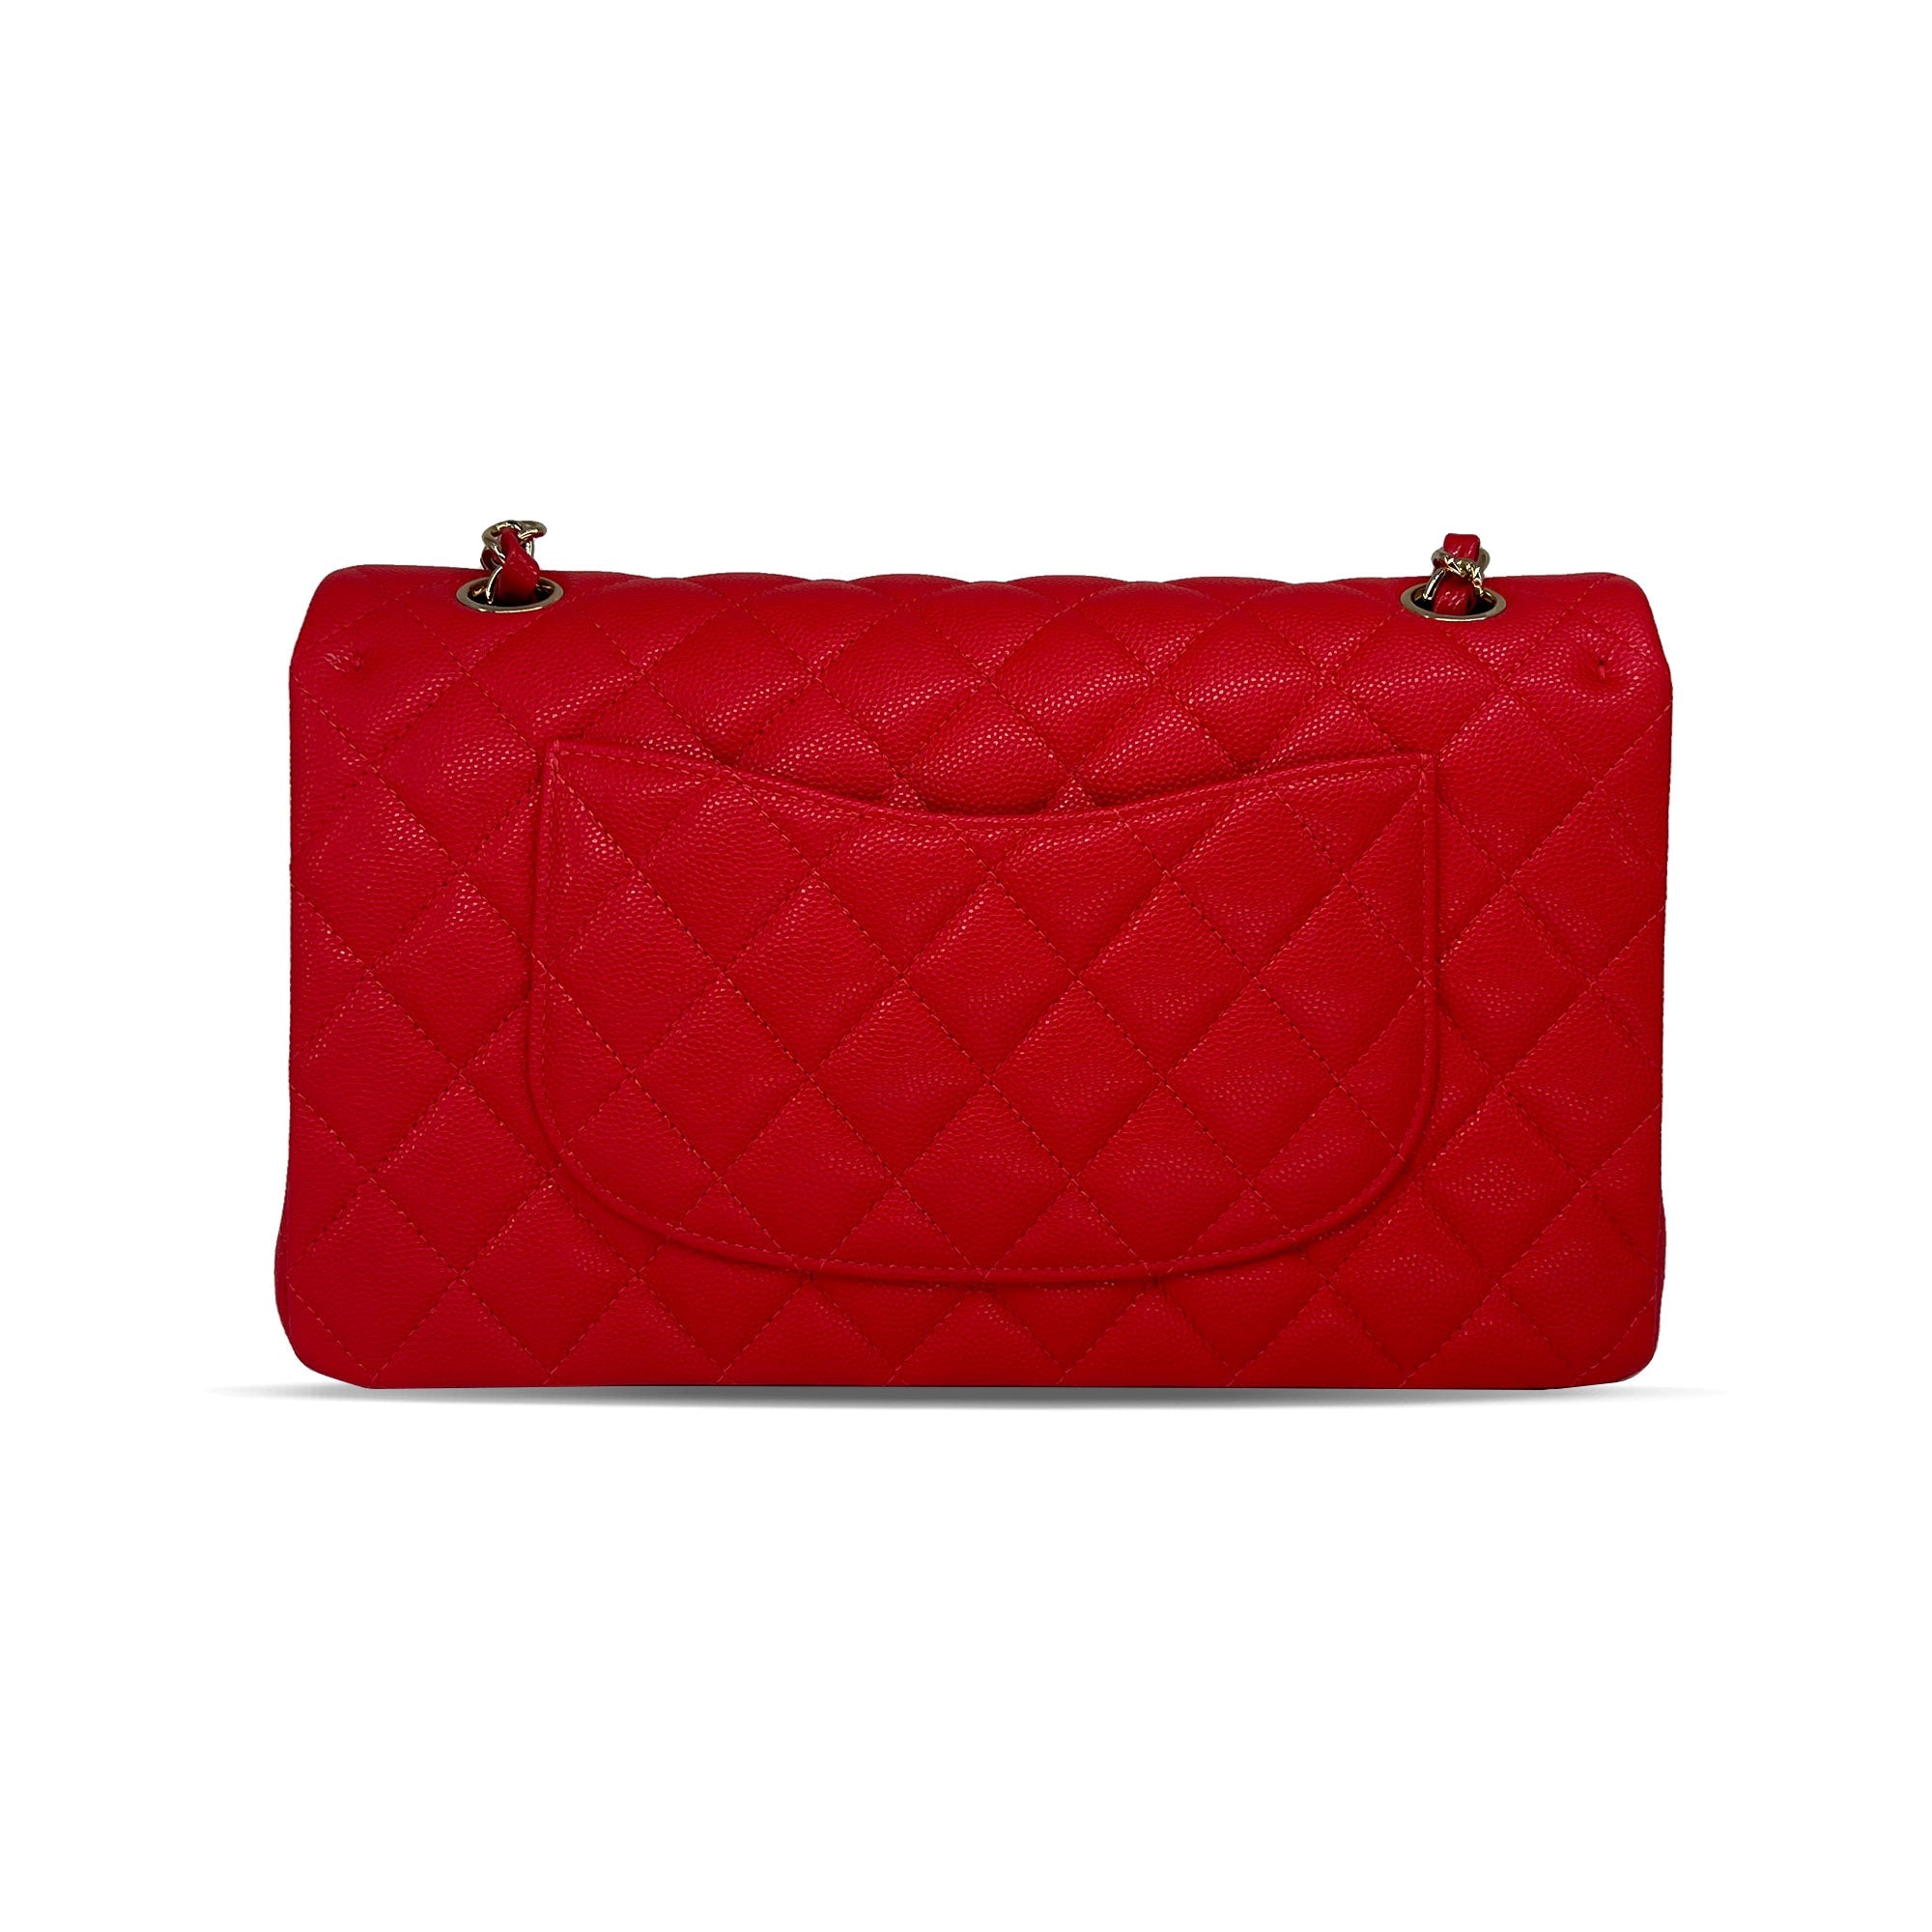 Chanel red/watermelon caviar leather double flap closure bag